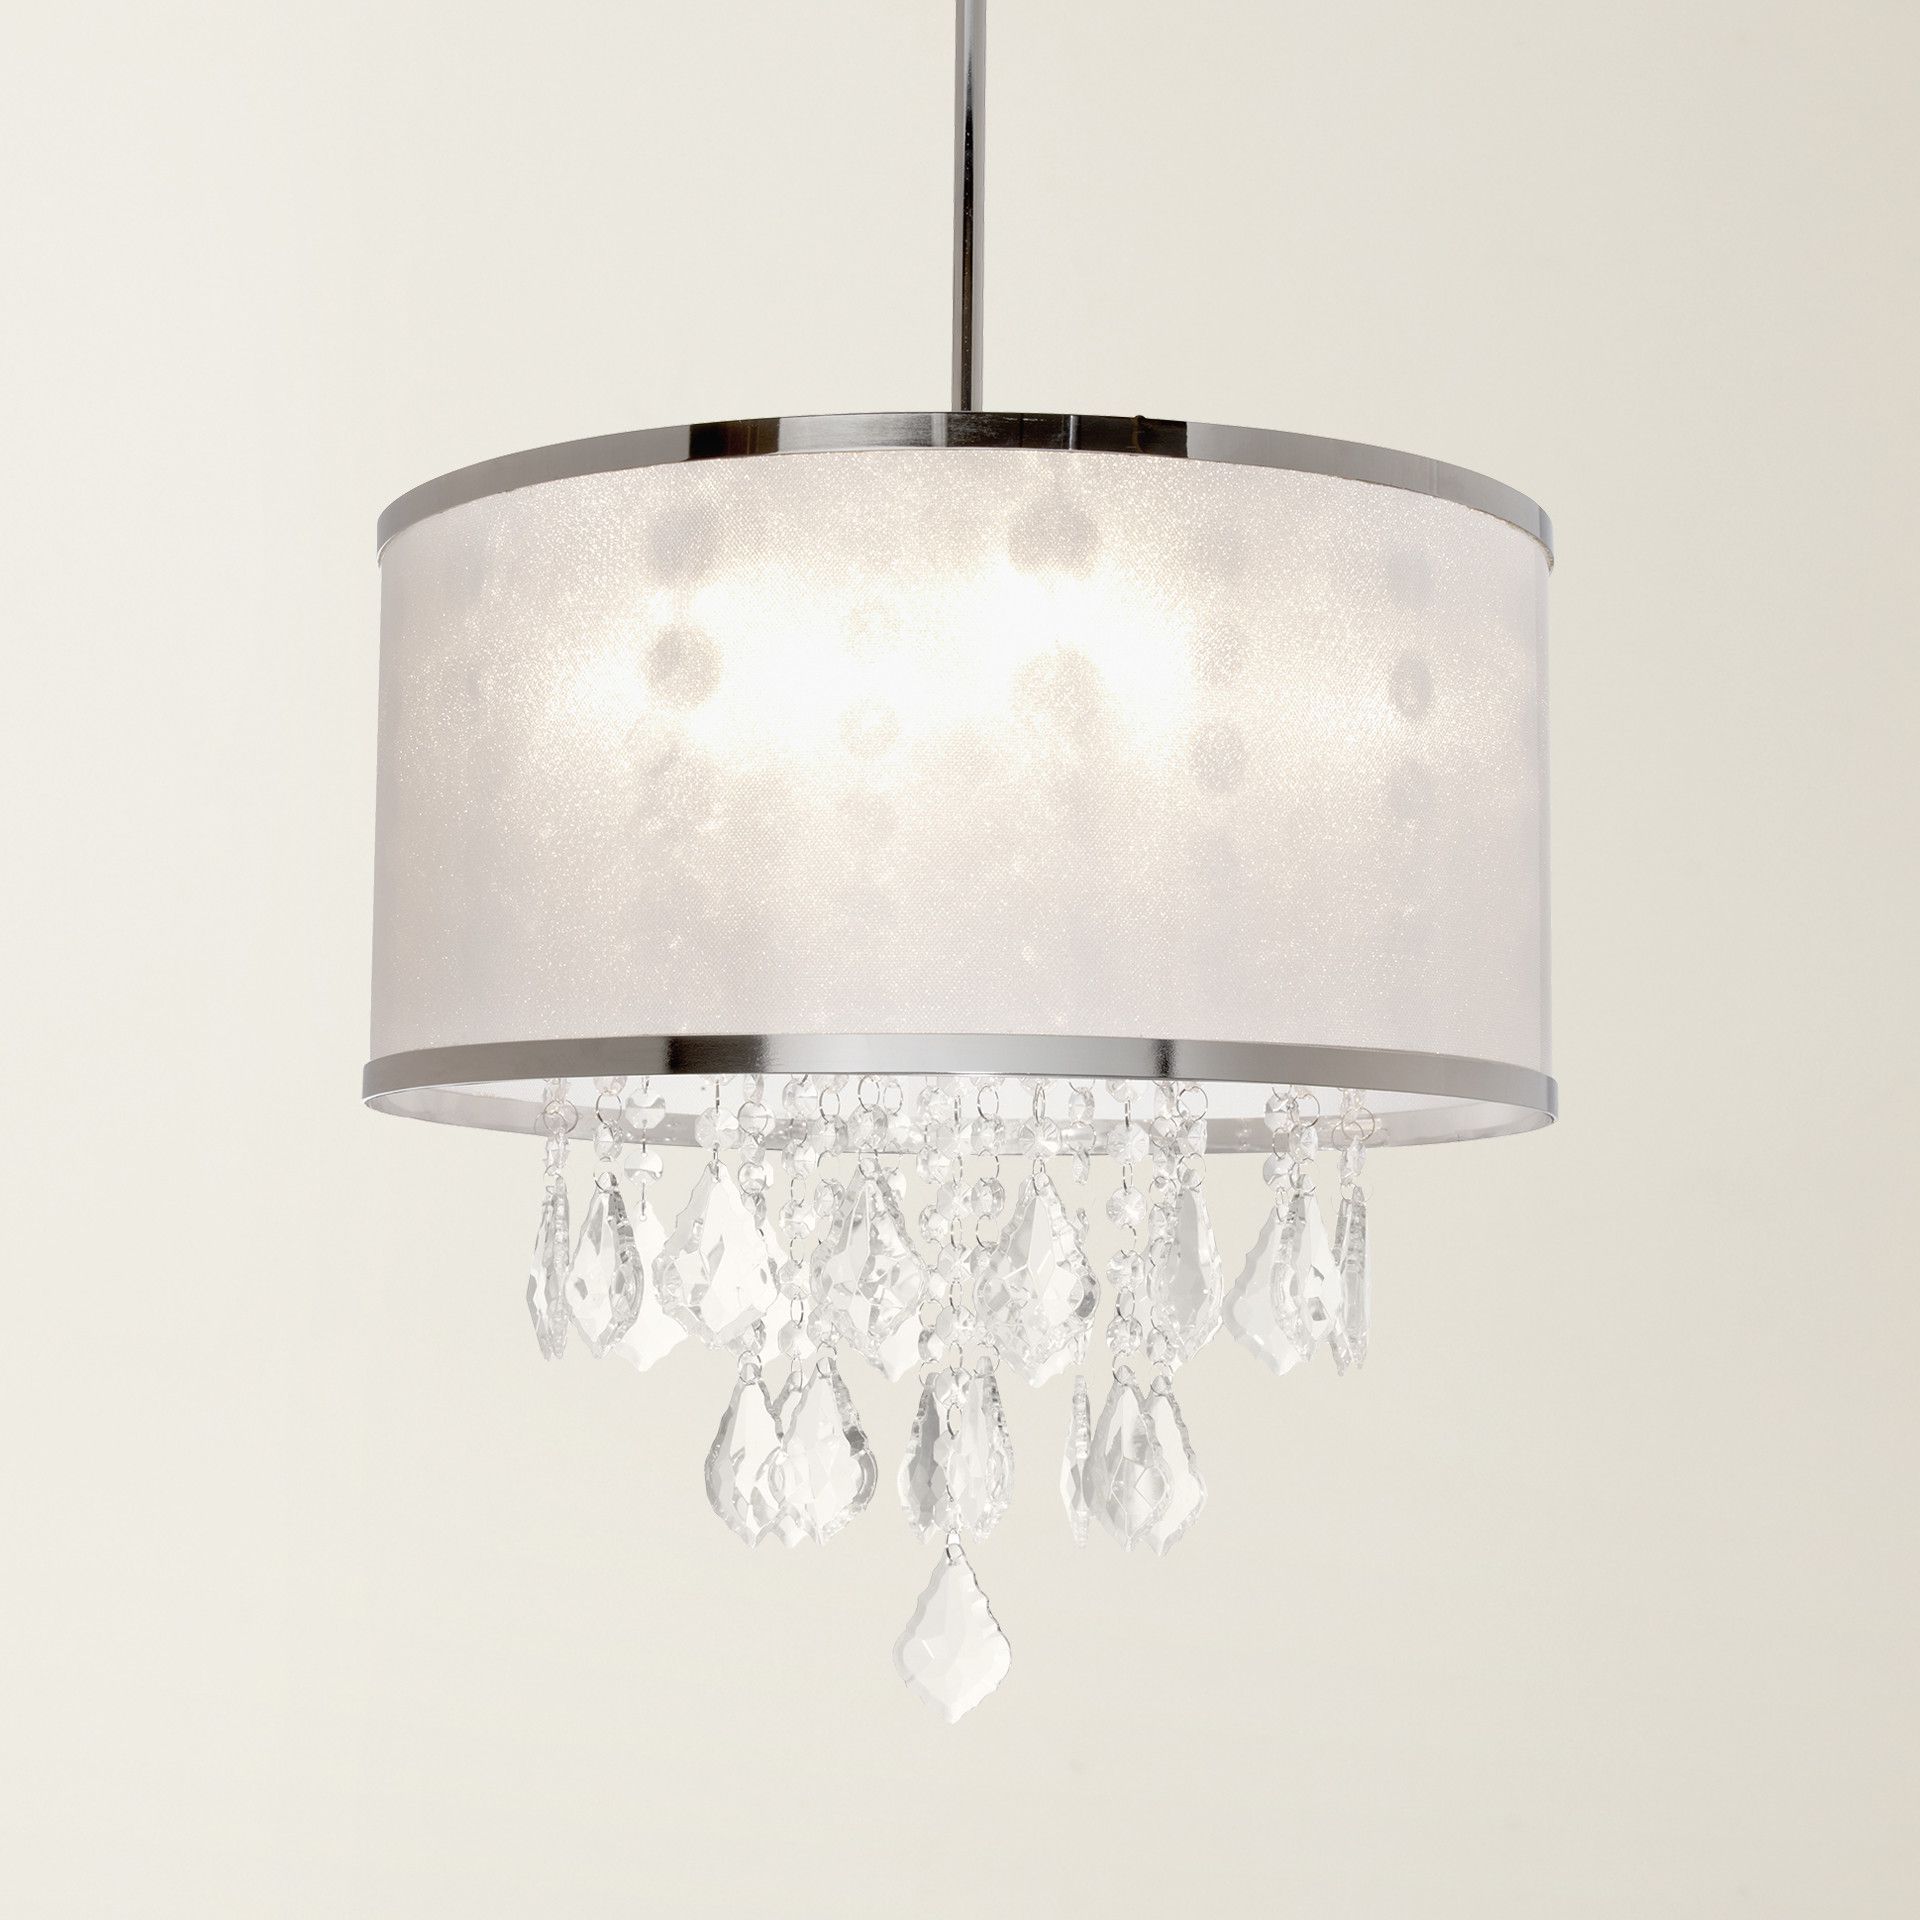 Best And Newest Jill 4 Light Drum Chandeliers With Regard To House Of Hampton® Leibowitz 4 Light Drum Chandelier (View 12 of 25)